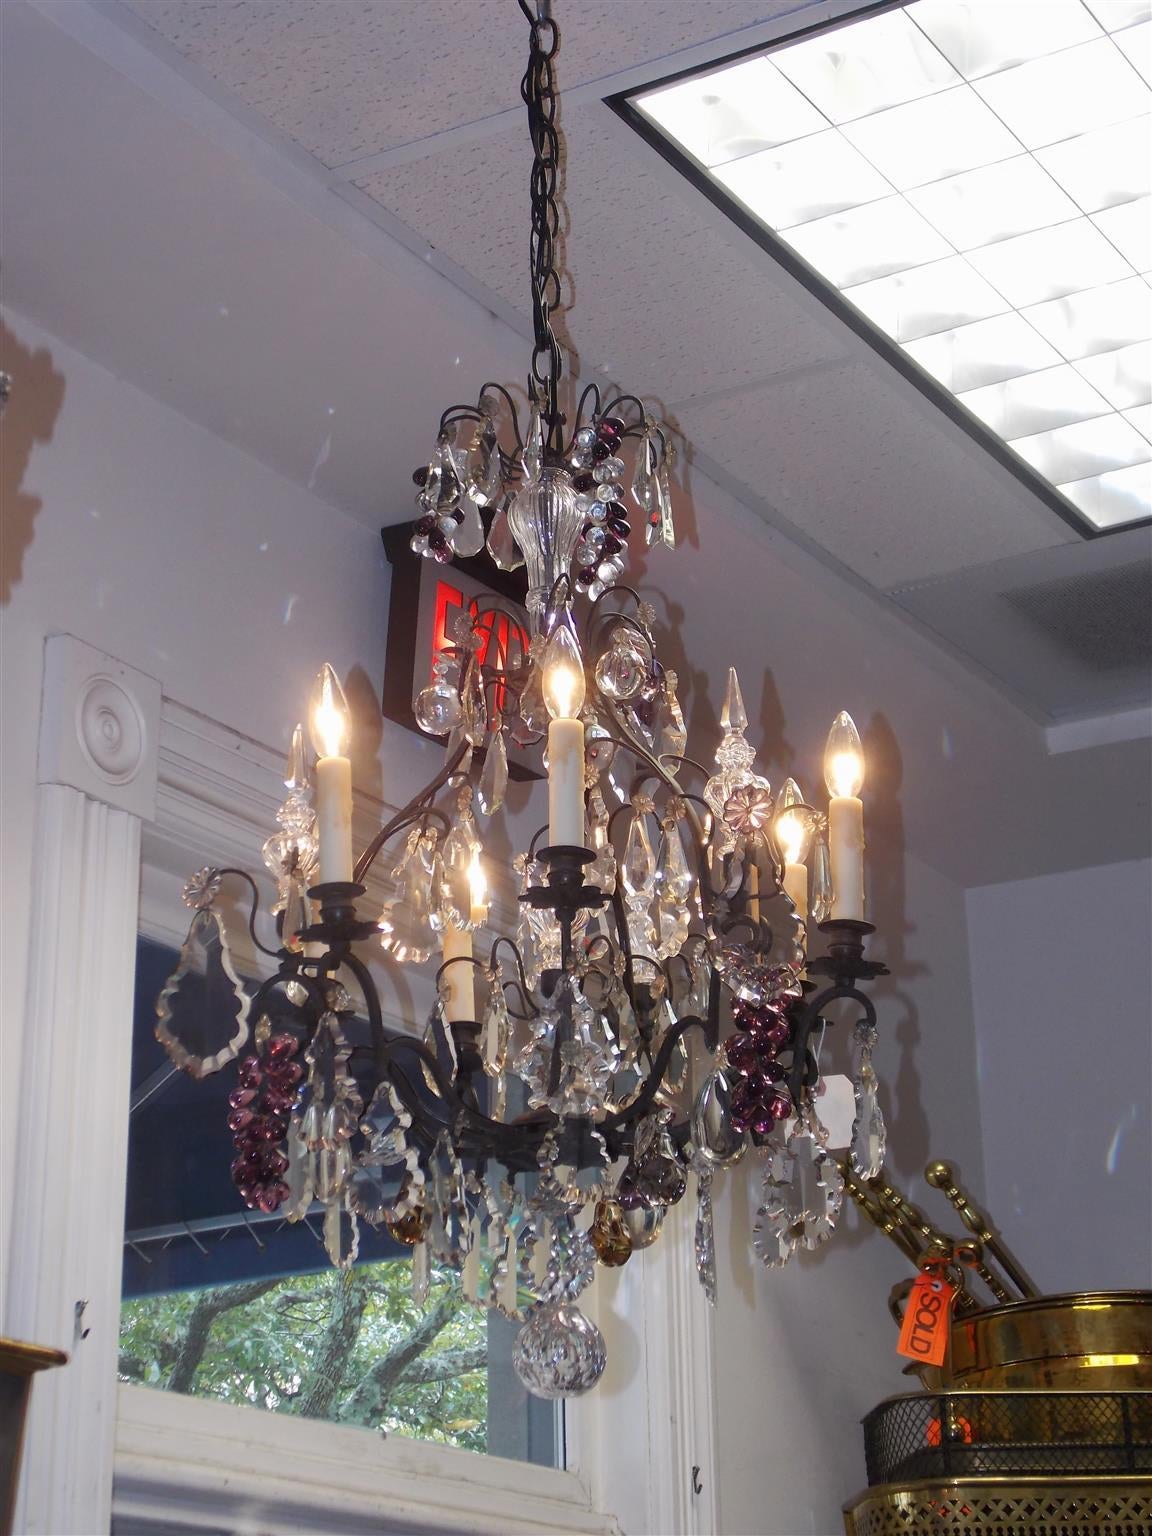 French bronze and crystal six-light chandelier with amethyst grape clusters, crystal spheres, and terminating with a cut crystal ball. Chandelier was originally candle powered and has been electrified, Early 19th century.